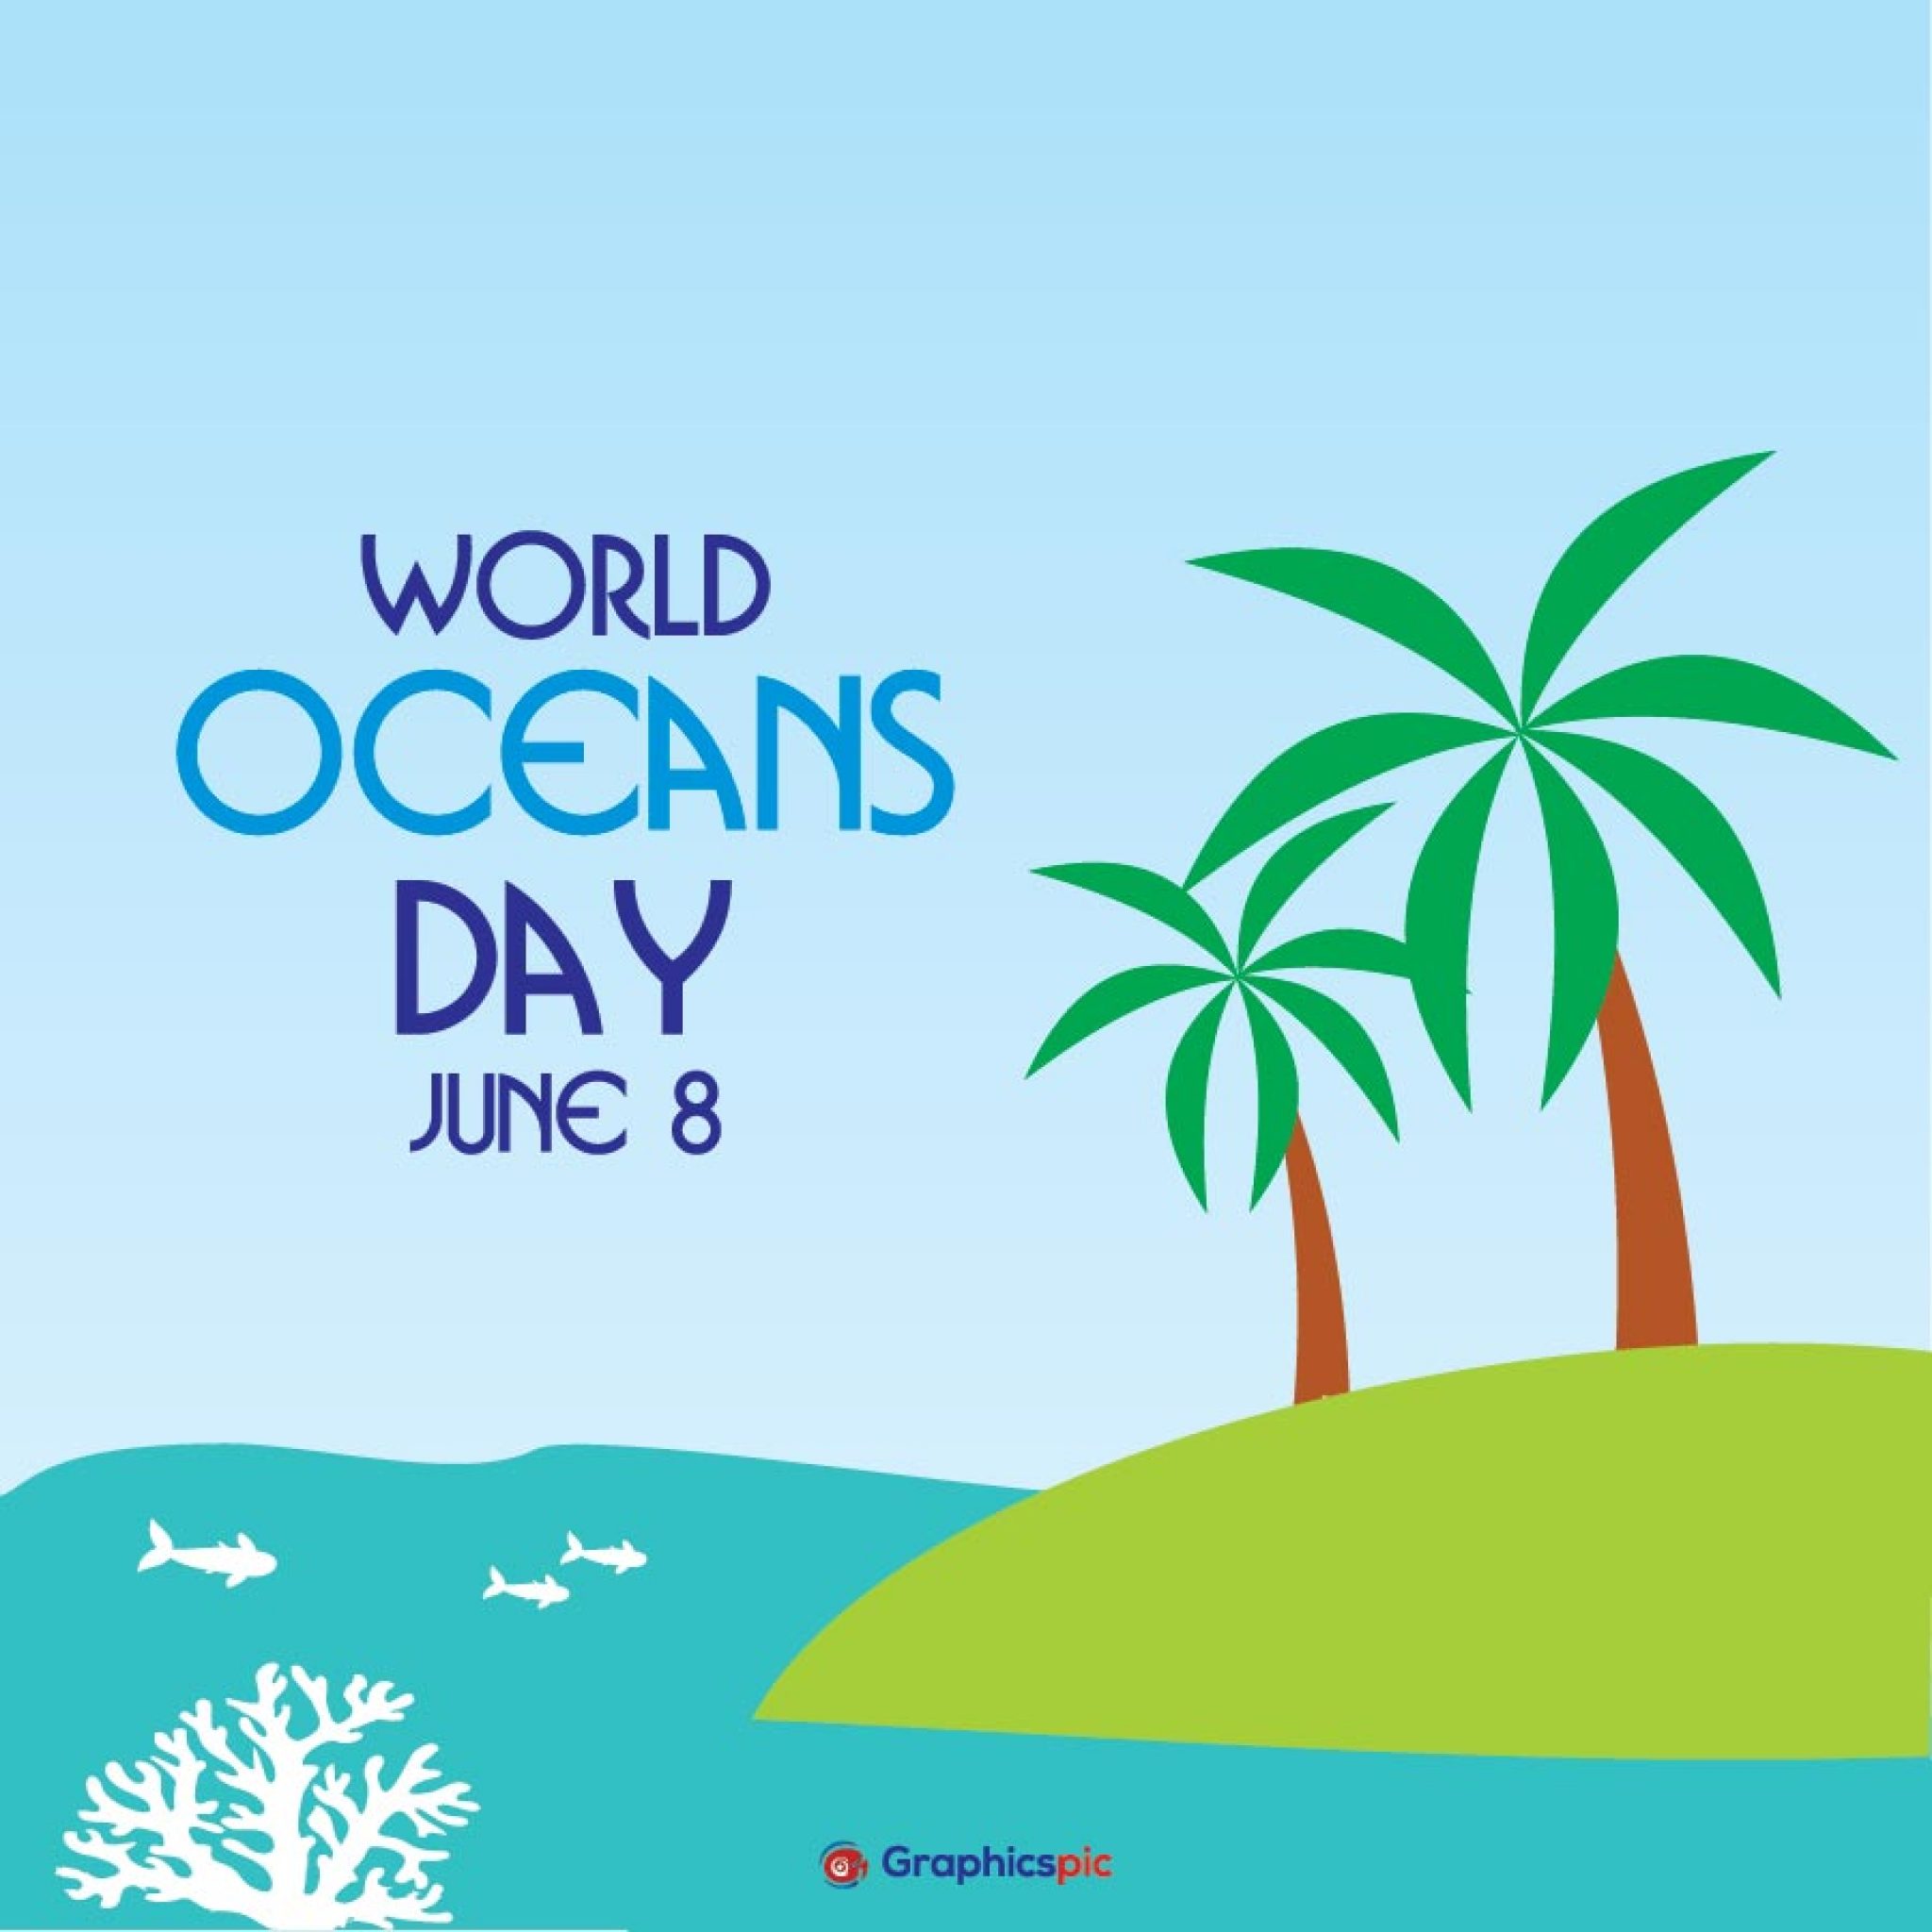 World oceans day 8 June background with coconut tree & whale